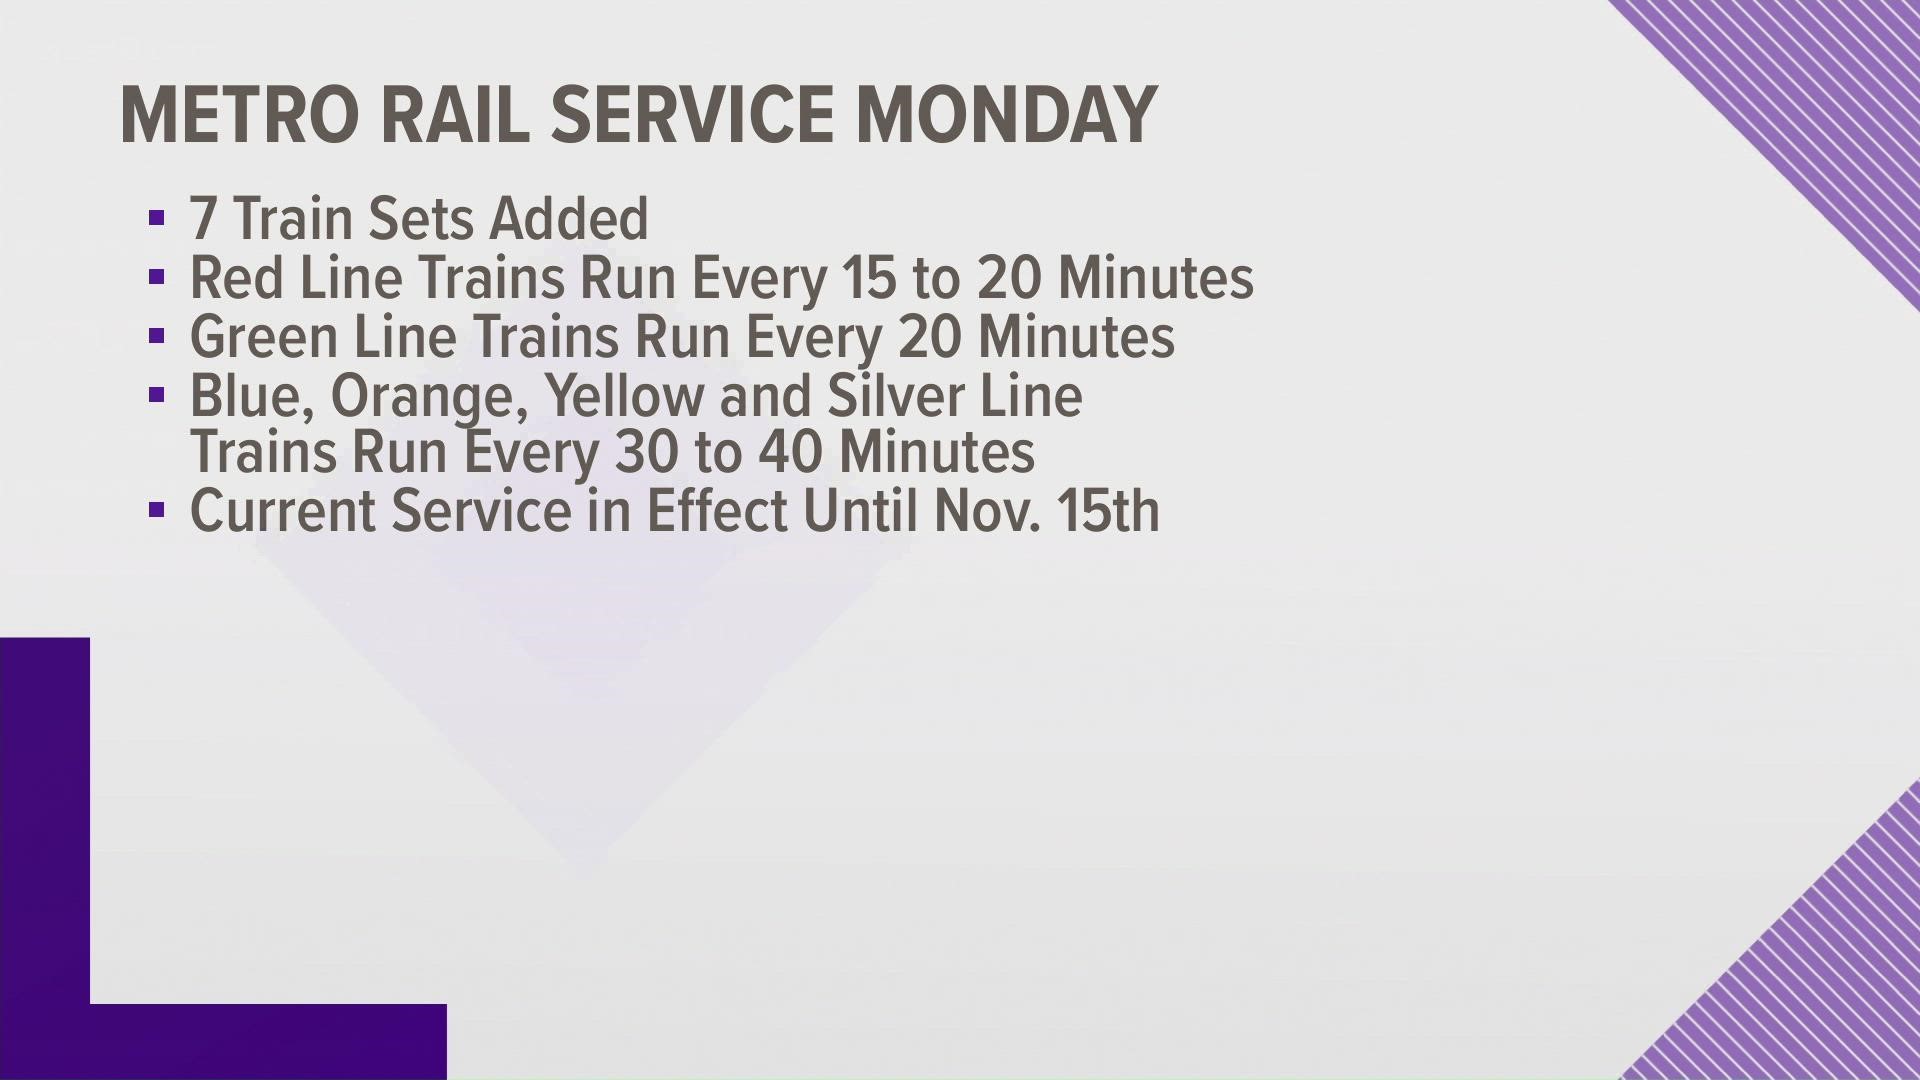 WMATA said it will have 39 trains in service starting Monday, improving Green Line service to every 20 minutes.